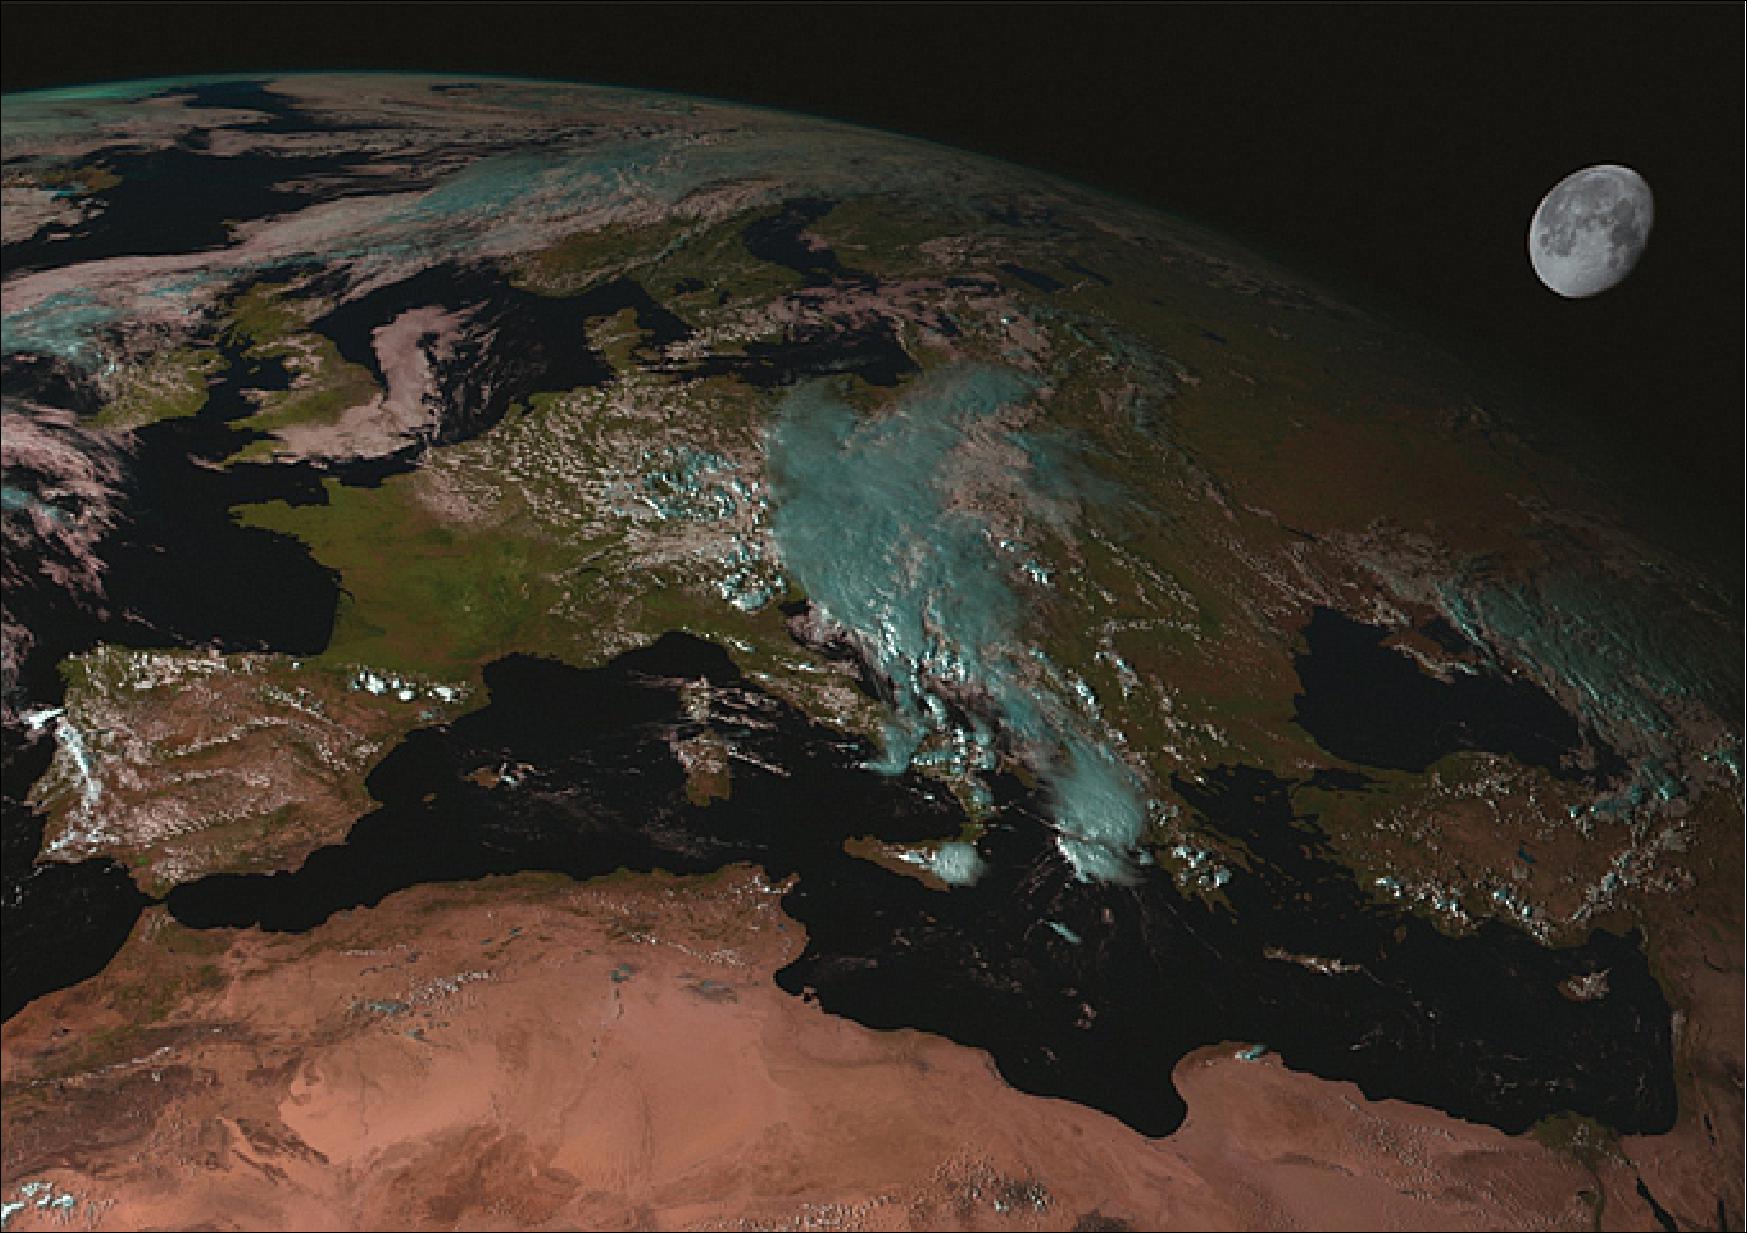 Figure 9: The moon appears in an image captured by the SEVIRI instrument on a EUMETSAT Meteosat Second Generation satellite (image credit: EUMETSAT)